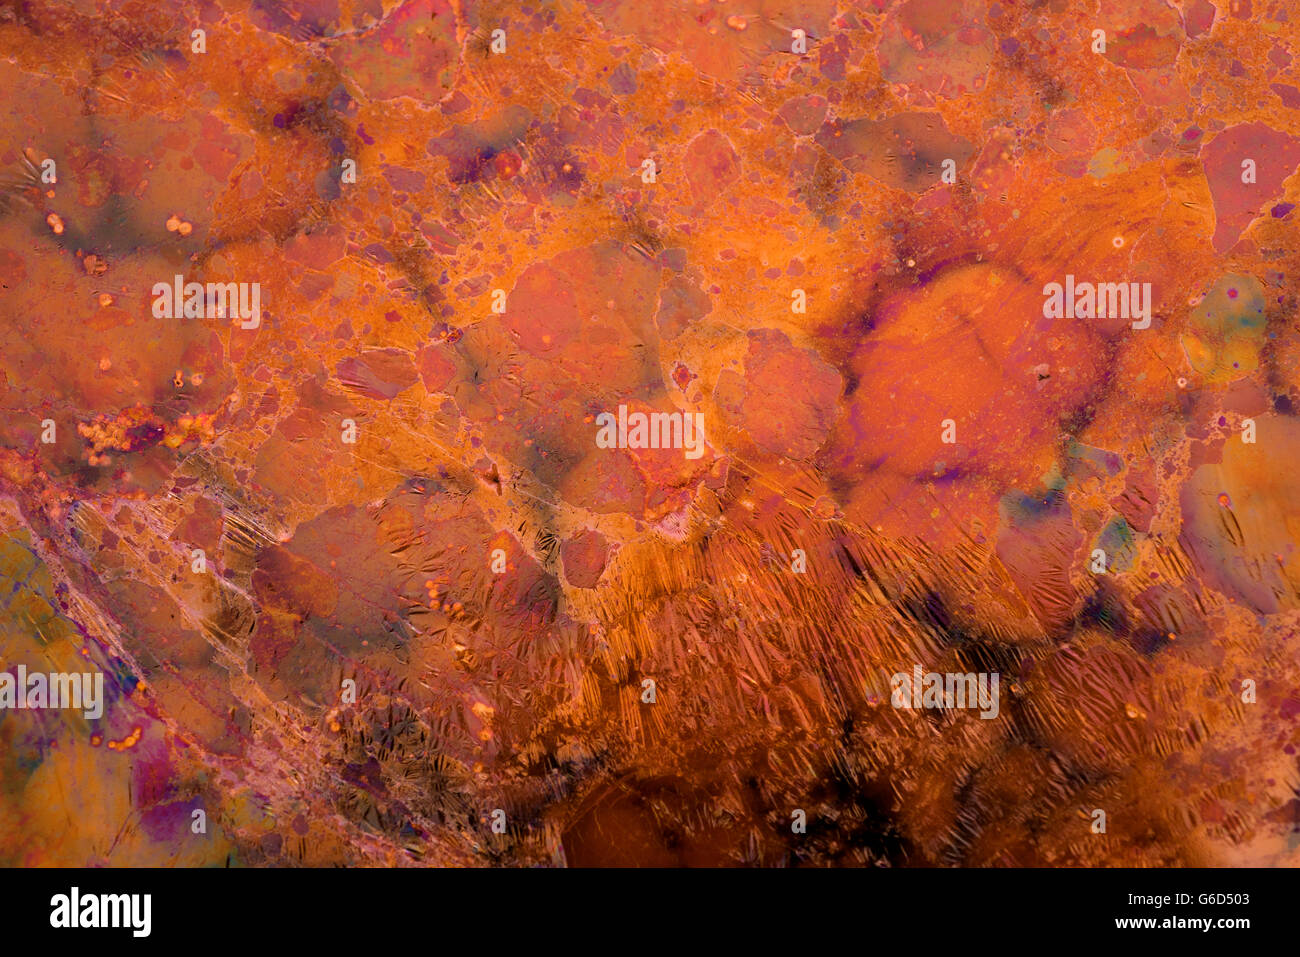 Grunge background in vibrant contrast color. Abstract art texture backdrop of red liquid. Stock Photo